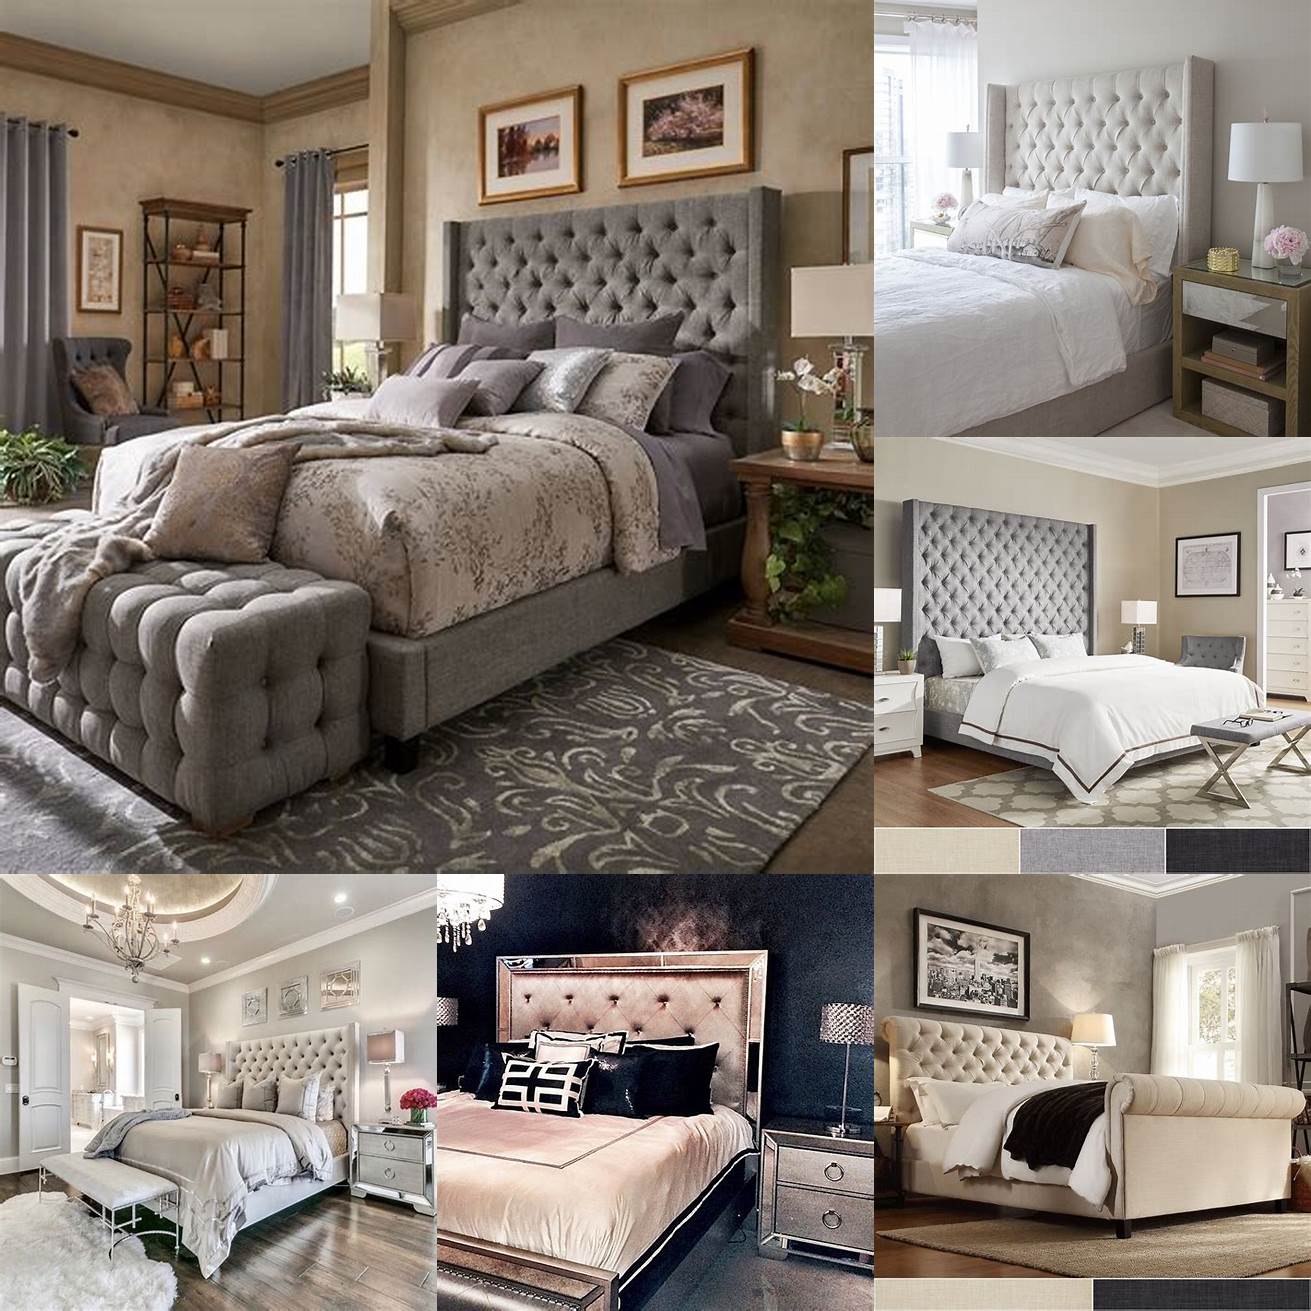 Consider your style Think about the overall style of your bedroom and choose a bed that complements it Tufted beds come in various materials and colors so you can find one that fits your personal taste